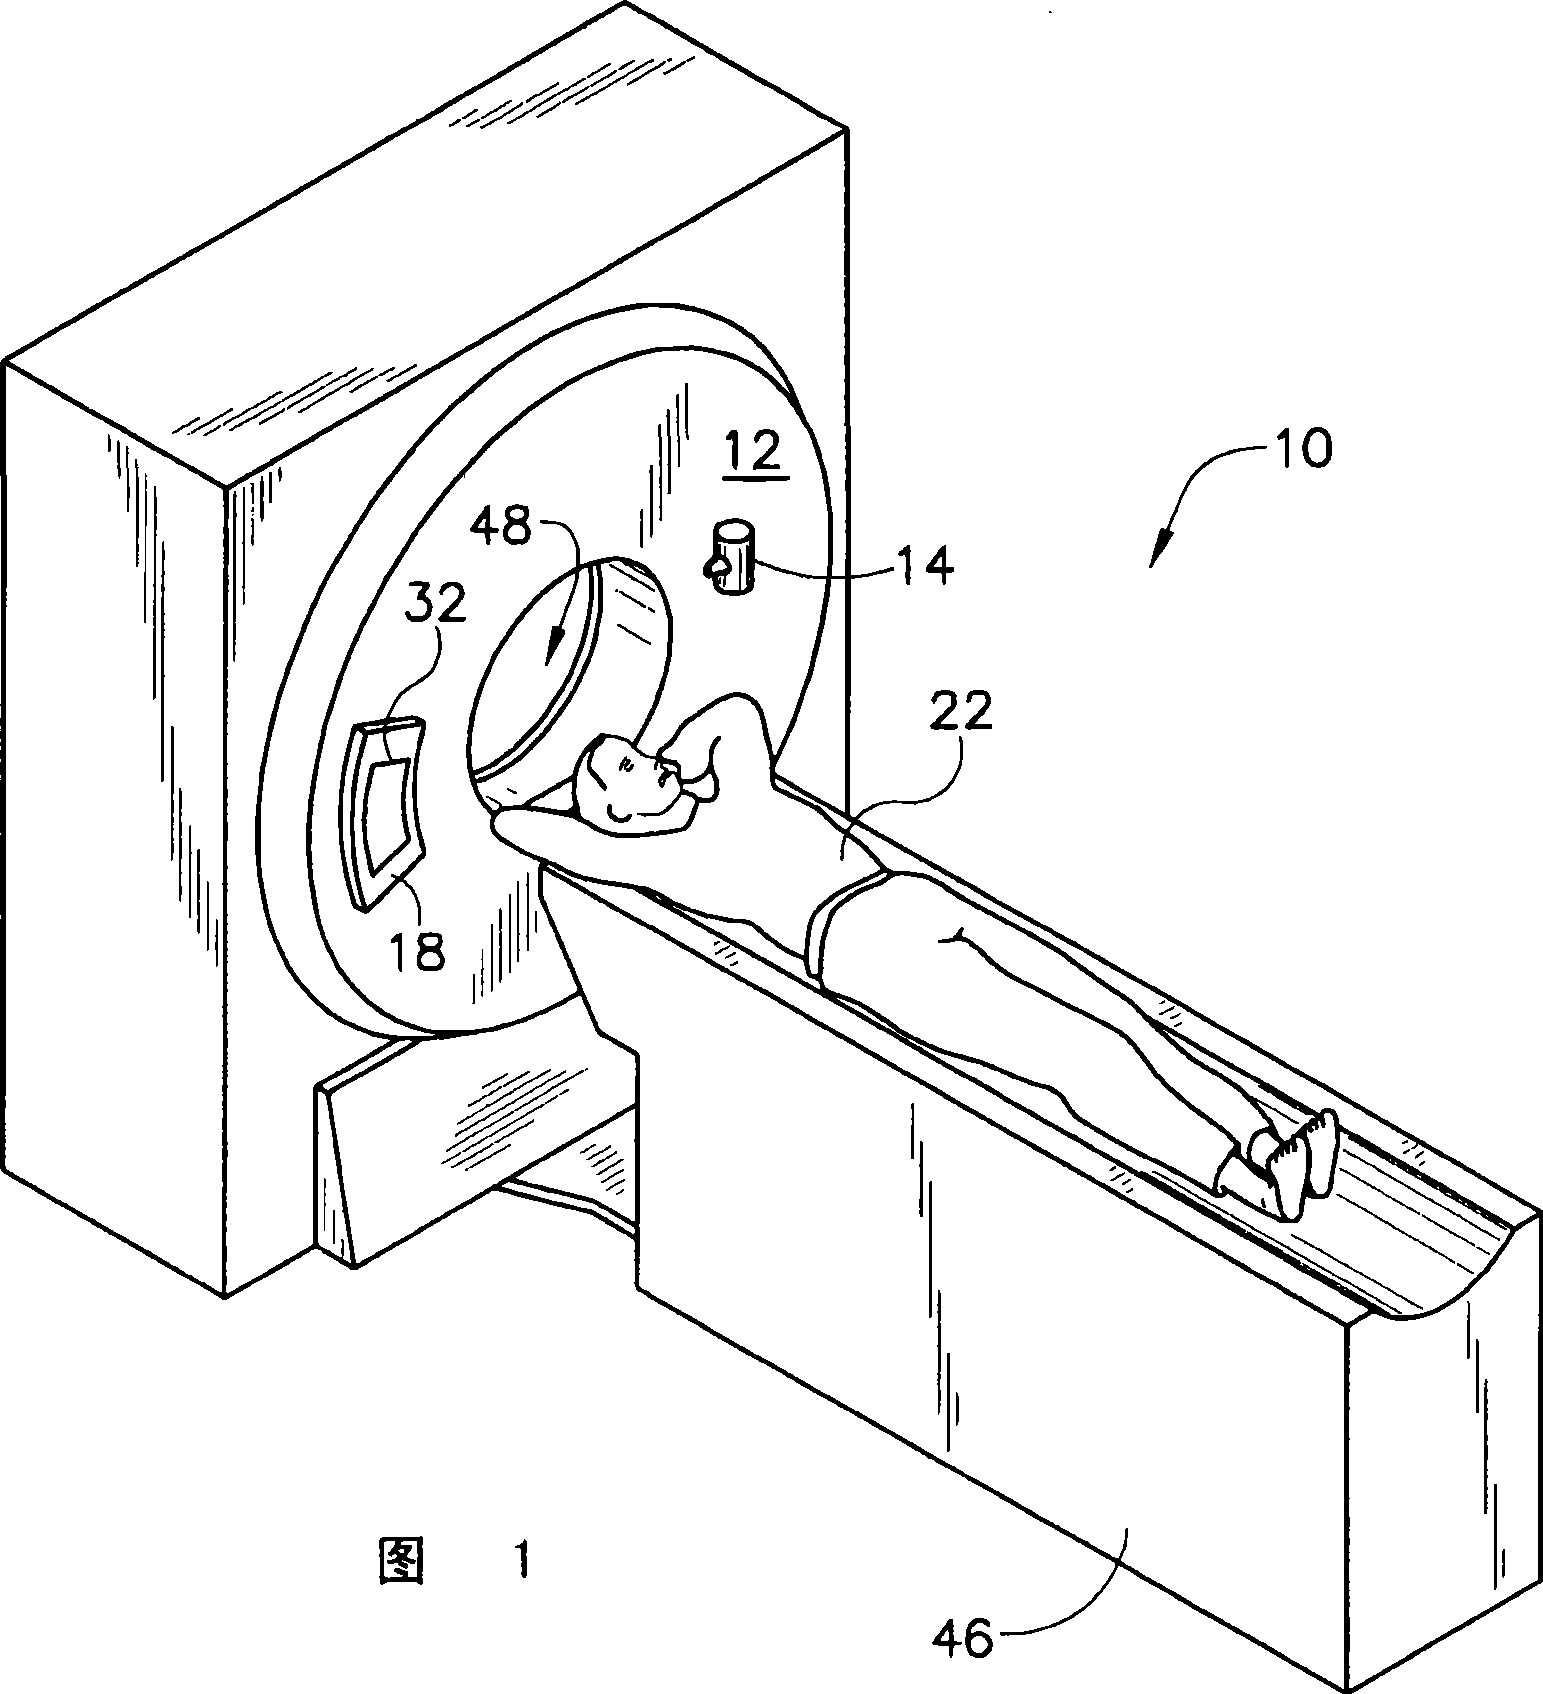 System and method of ct imaging with second tube/detector patching